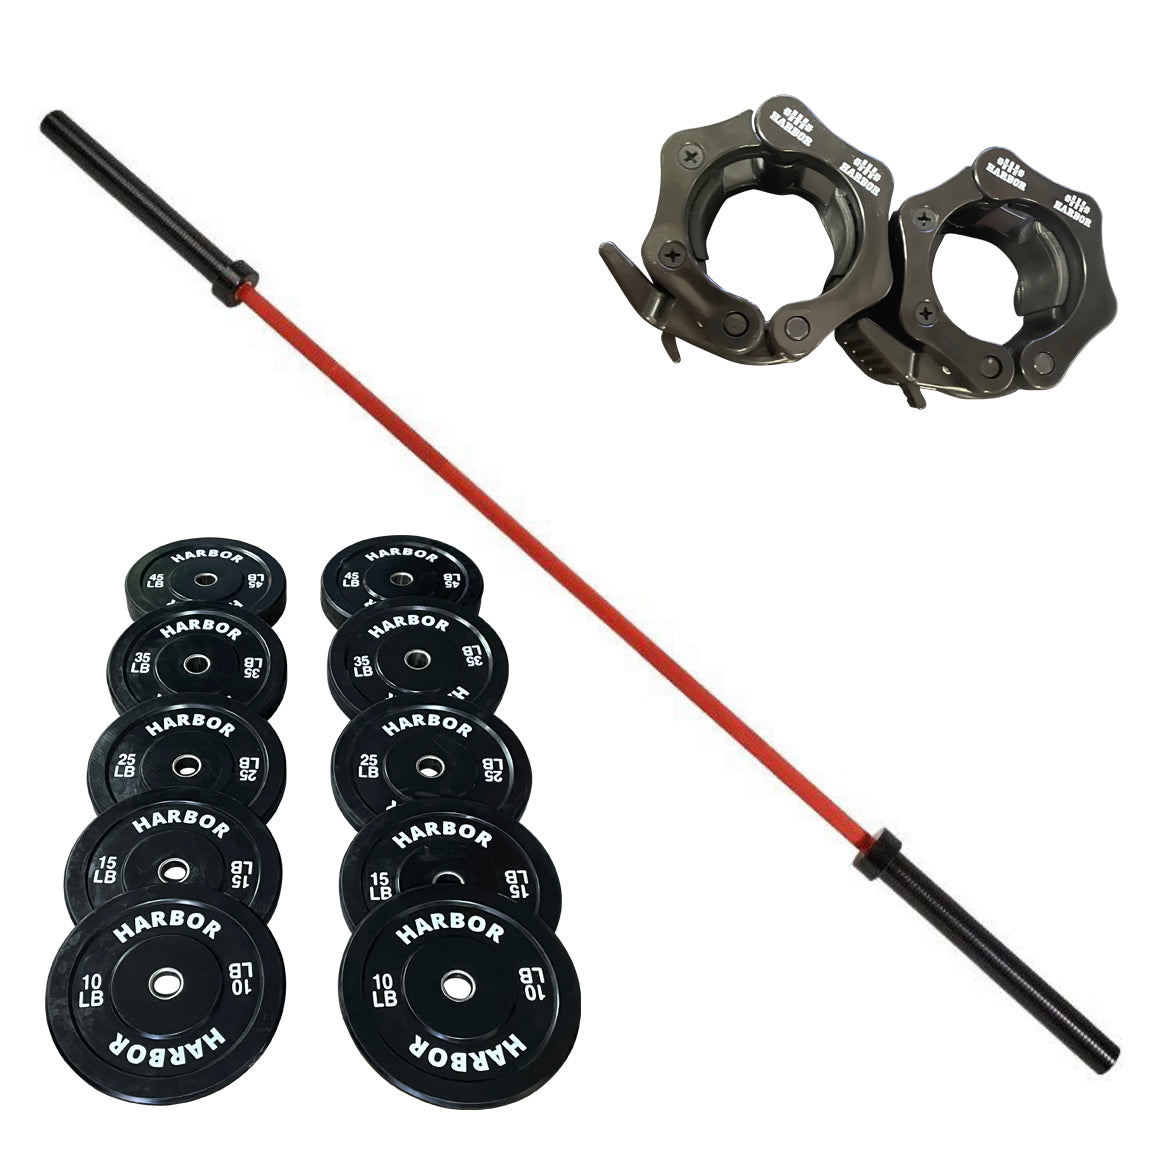 Home Gym Package: 260lb set + 1 Cerakote Olympic Barbell and lockjaw collars